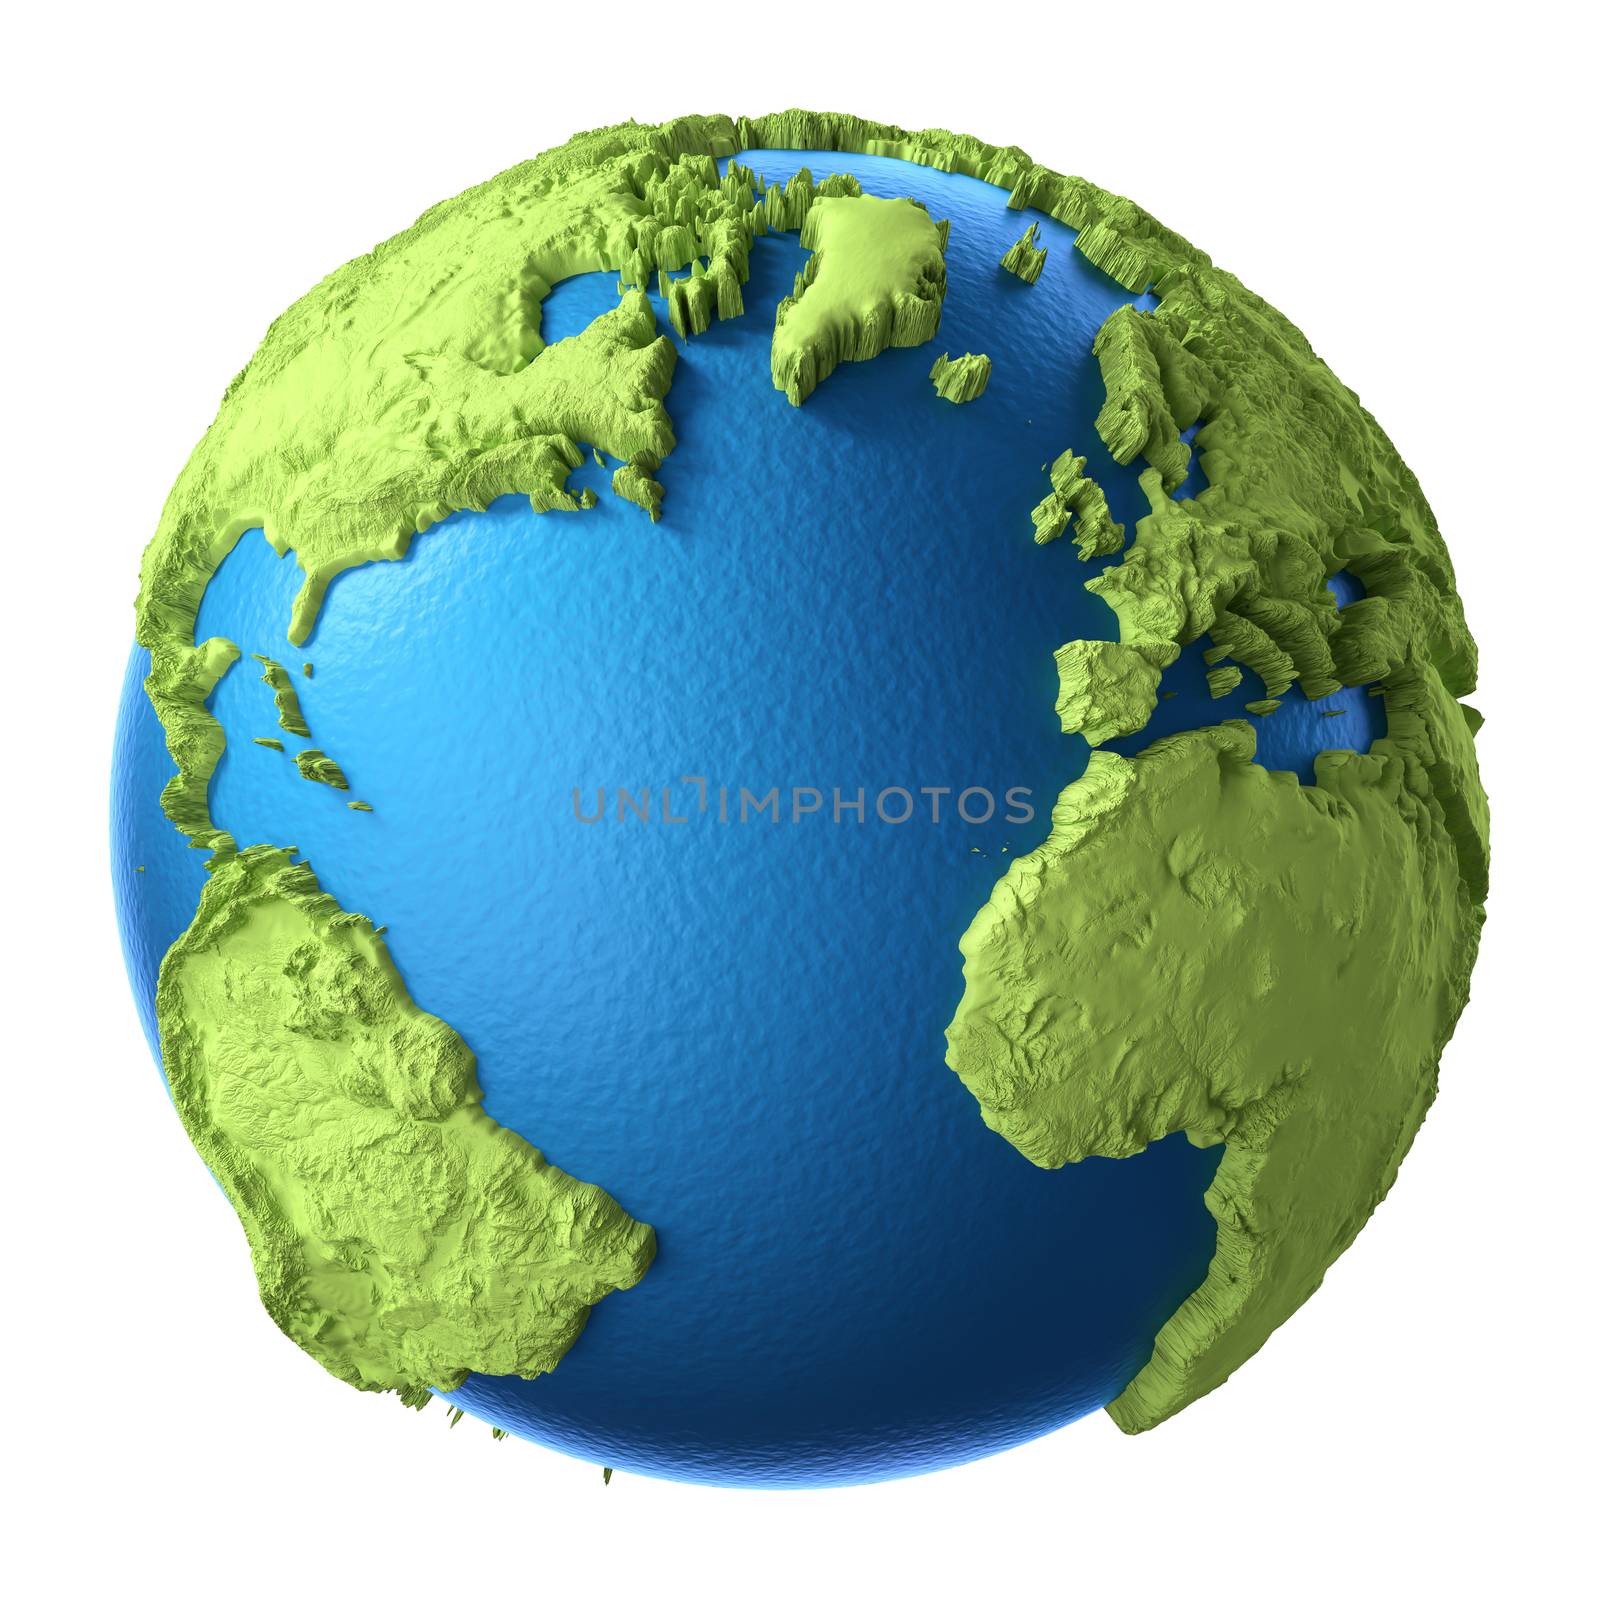 Globe 3d render isolated on white background. Elements of this image furnished by NASA